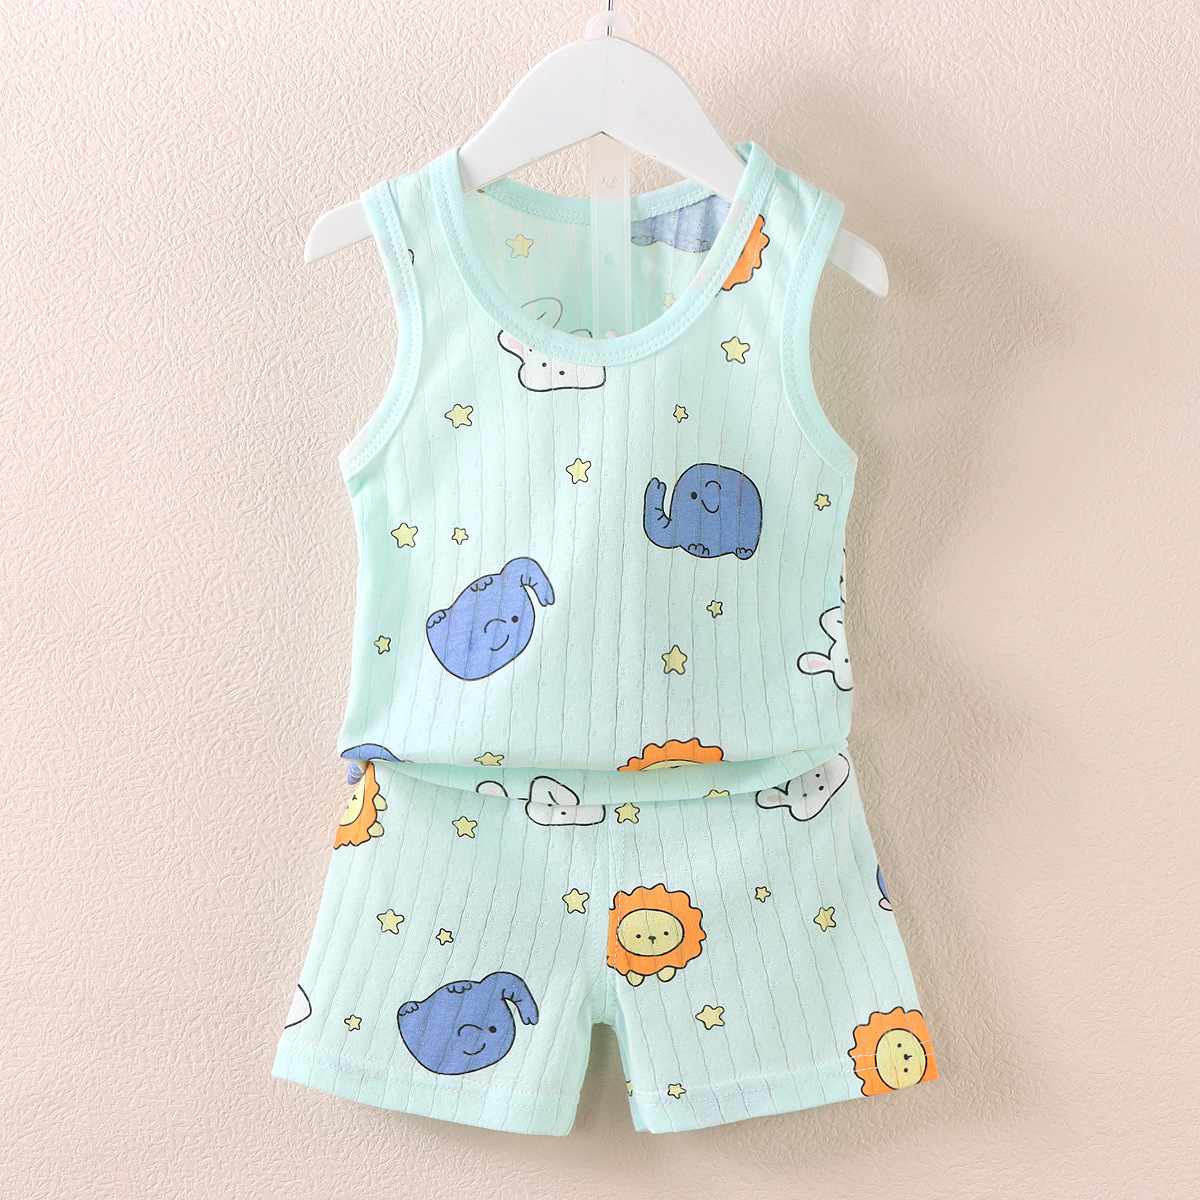 2023 Korean Style Children's Vest Suit New Boys and Girls Baby Cartoon Thin Sleeveless Tank Top Shorts Suit Fashion